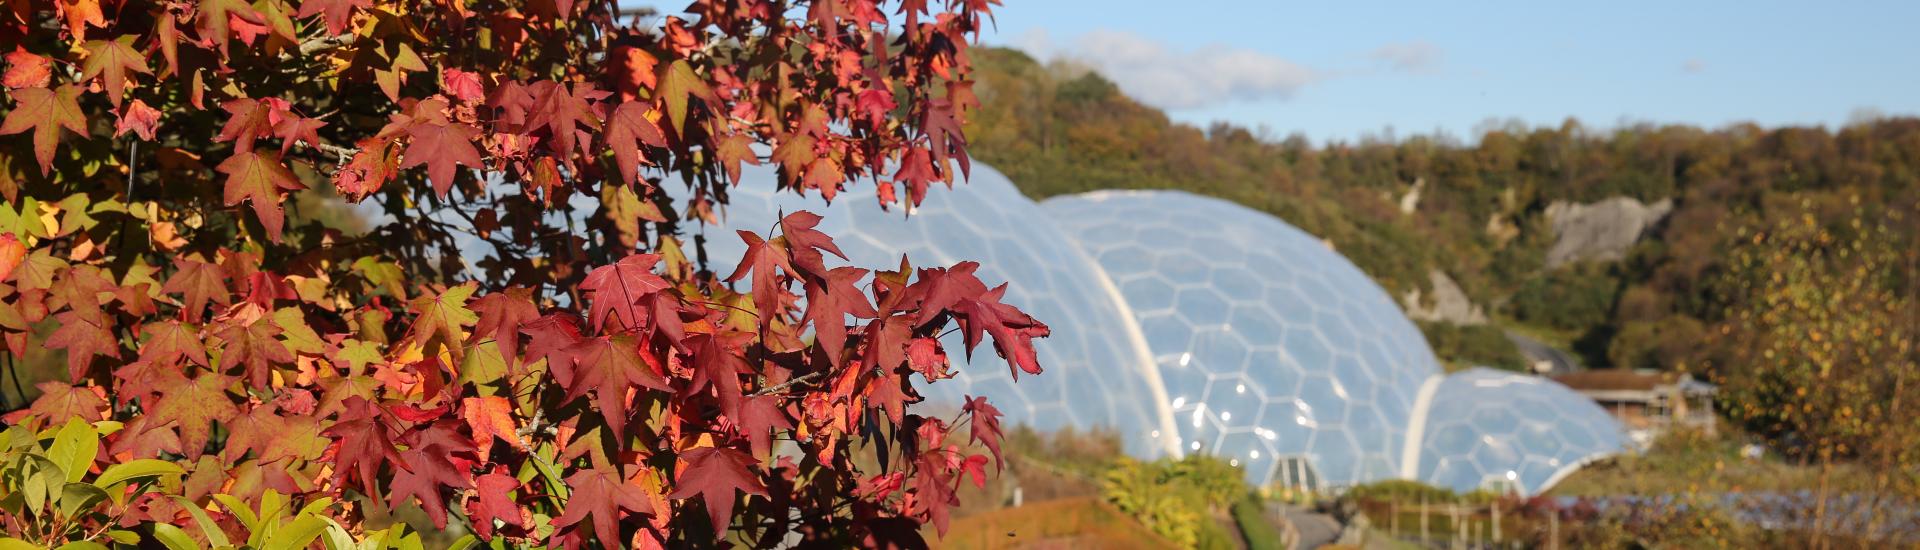 Red leaved sweet gum tree with Eden's Biomes in the background